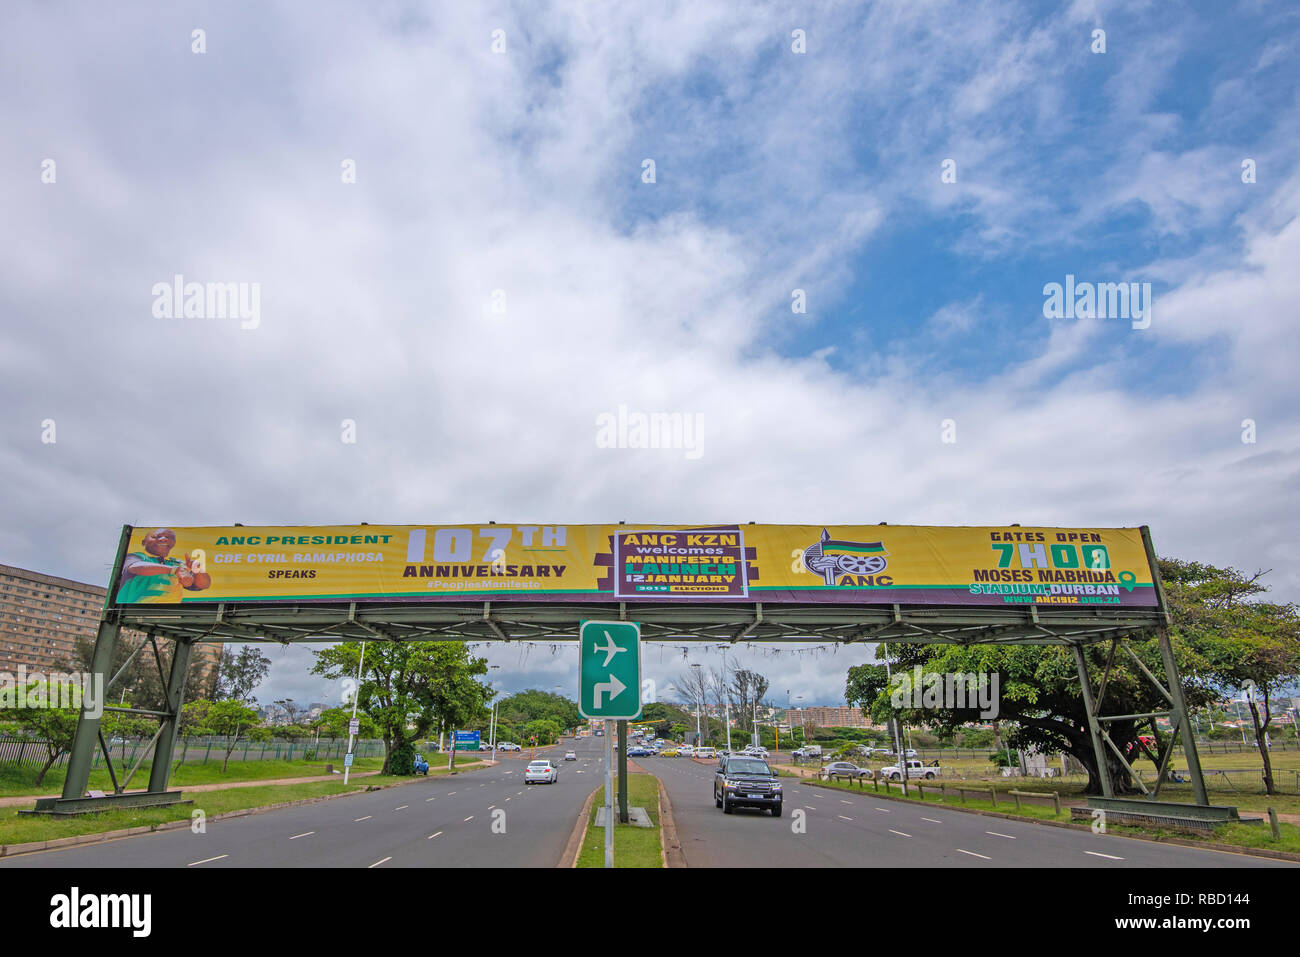 Durban, South Africa. 9th January, 2019. Political party banners and posters adorn Durban’s streets ahead of the African National Congress (ANC) 2019 Election Manifesto Launch set to take place at Moses Mabhida Stadium in Durban on Saturday, 12th January, 2019. The ANC is South Africa’s ruling party, but it faces major challenges from opposition parties the Democratic Alliance (DA) and the Economic Freedom Fighters (EFF). Jonathan Oberholster/Alamy Live News Stock Photo